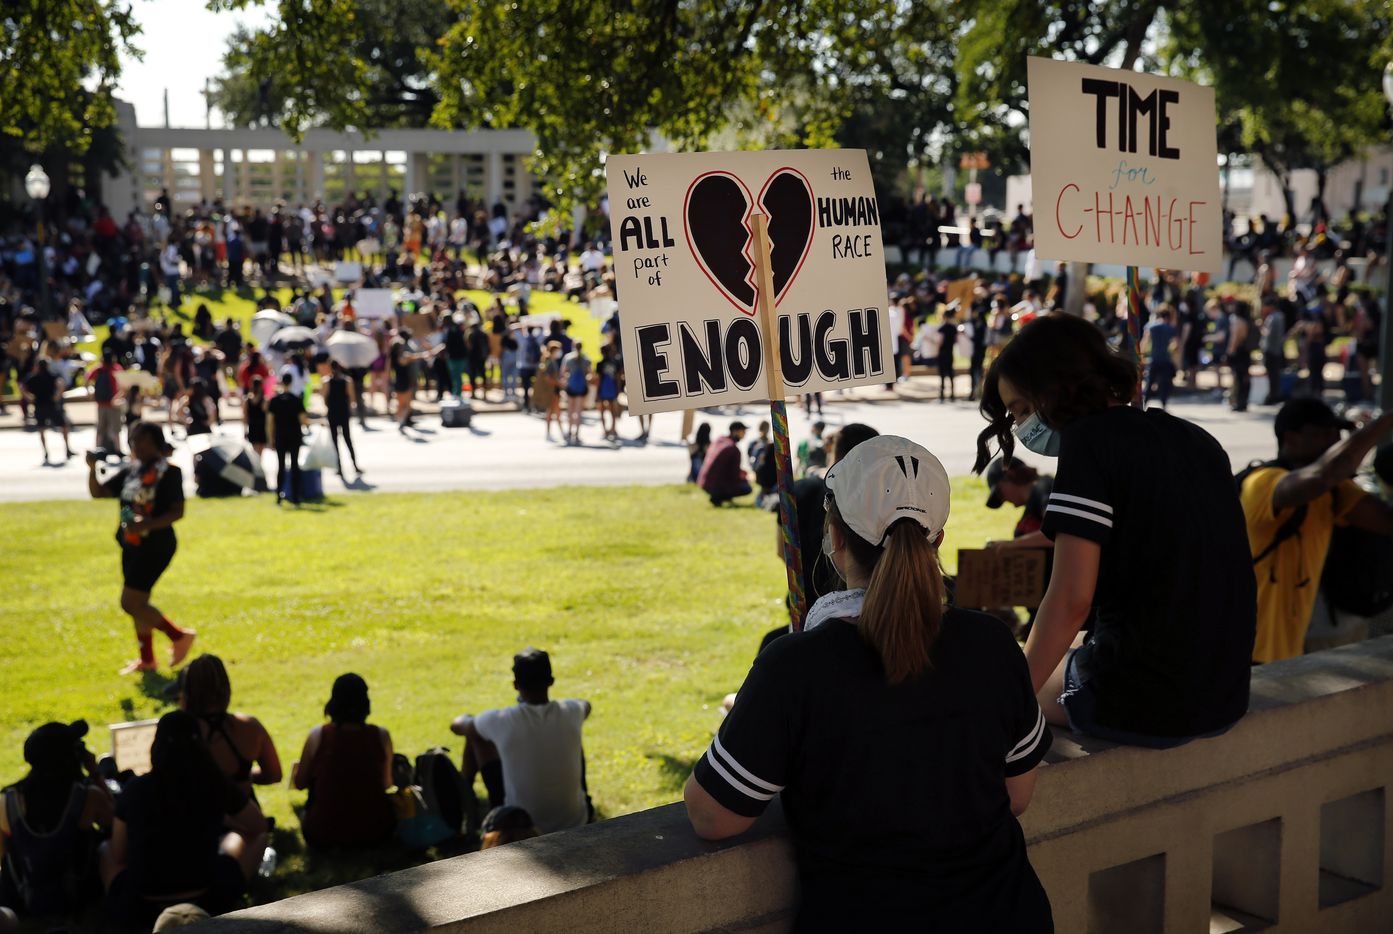 Leslie Detrick of Bedford (center, left) and her daughter Hannah Detrick joined other protestors in Dealey Plaza to support Black Lives Matters during a rally and march from Dallas City Hall, Wednesday, June 3, 2020. (Tom Fox/The Dallas Morning News)